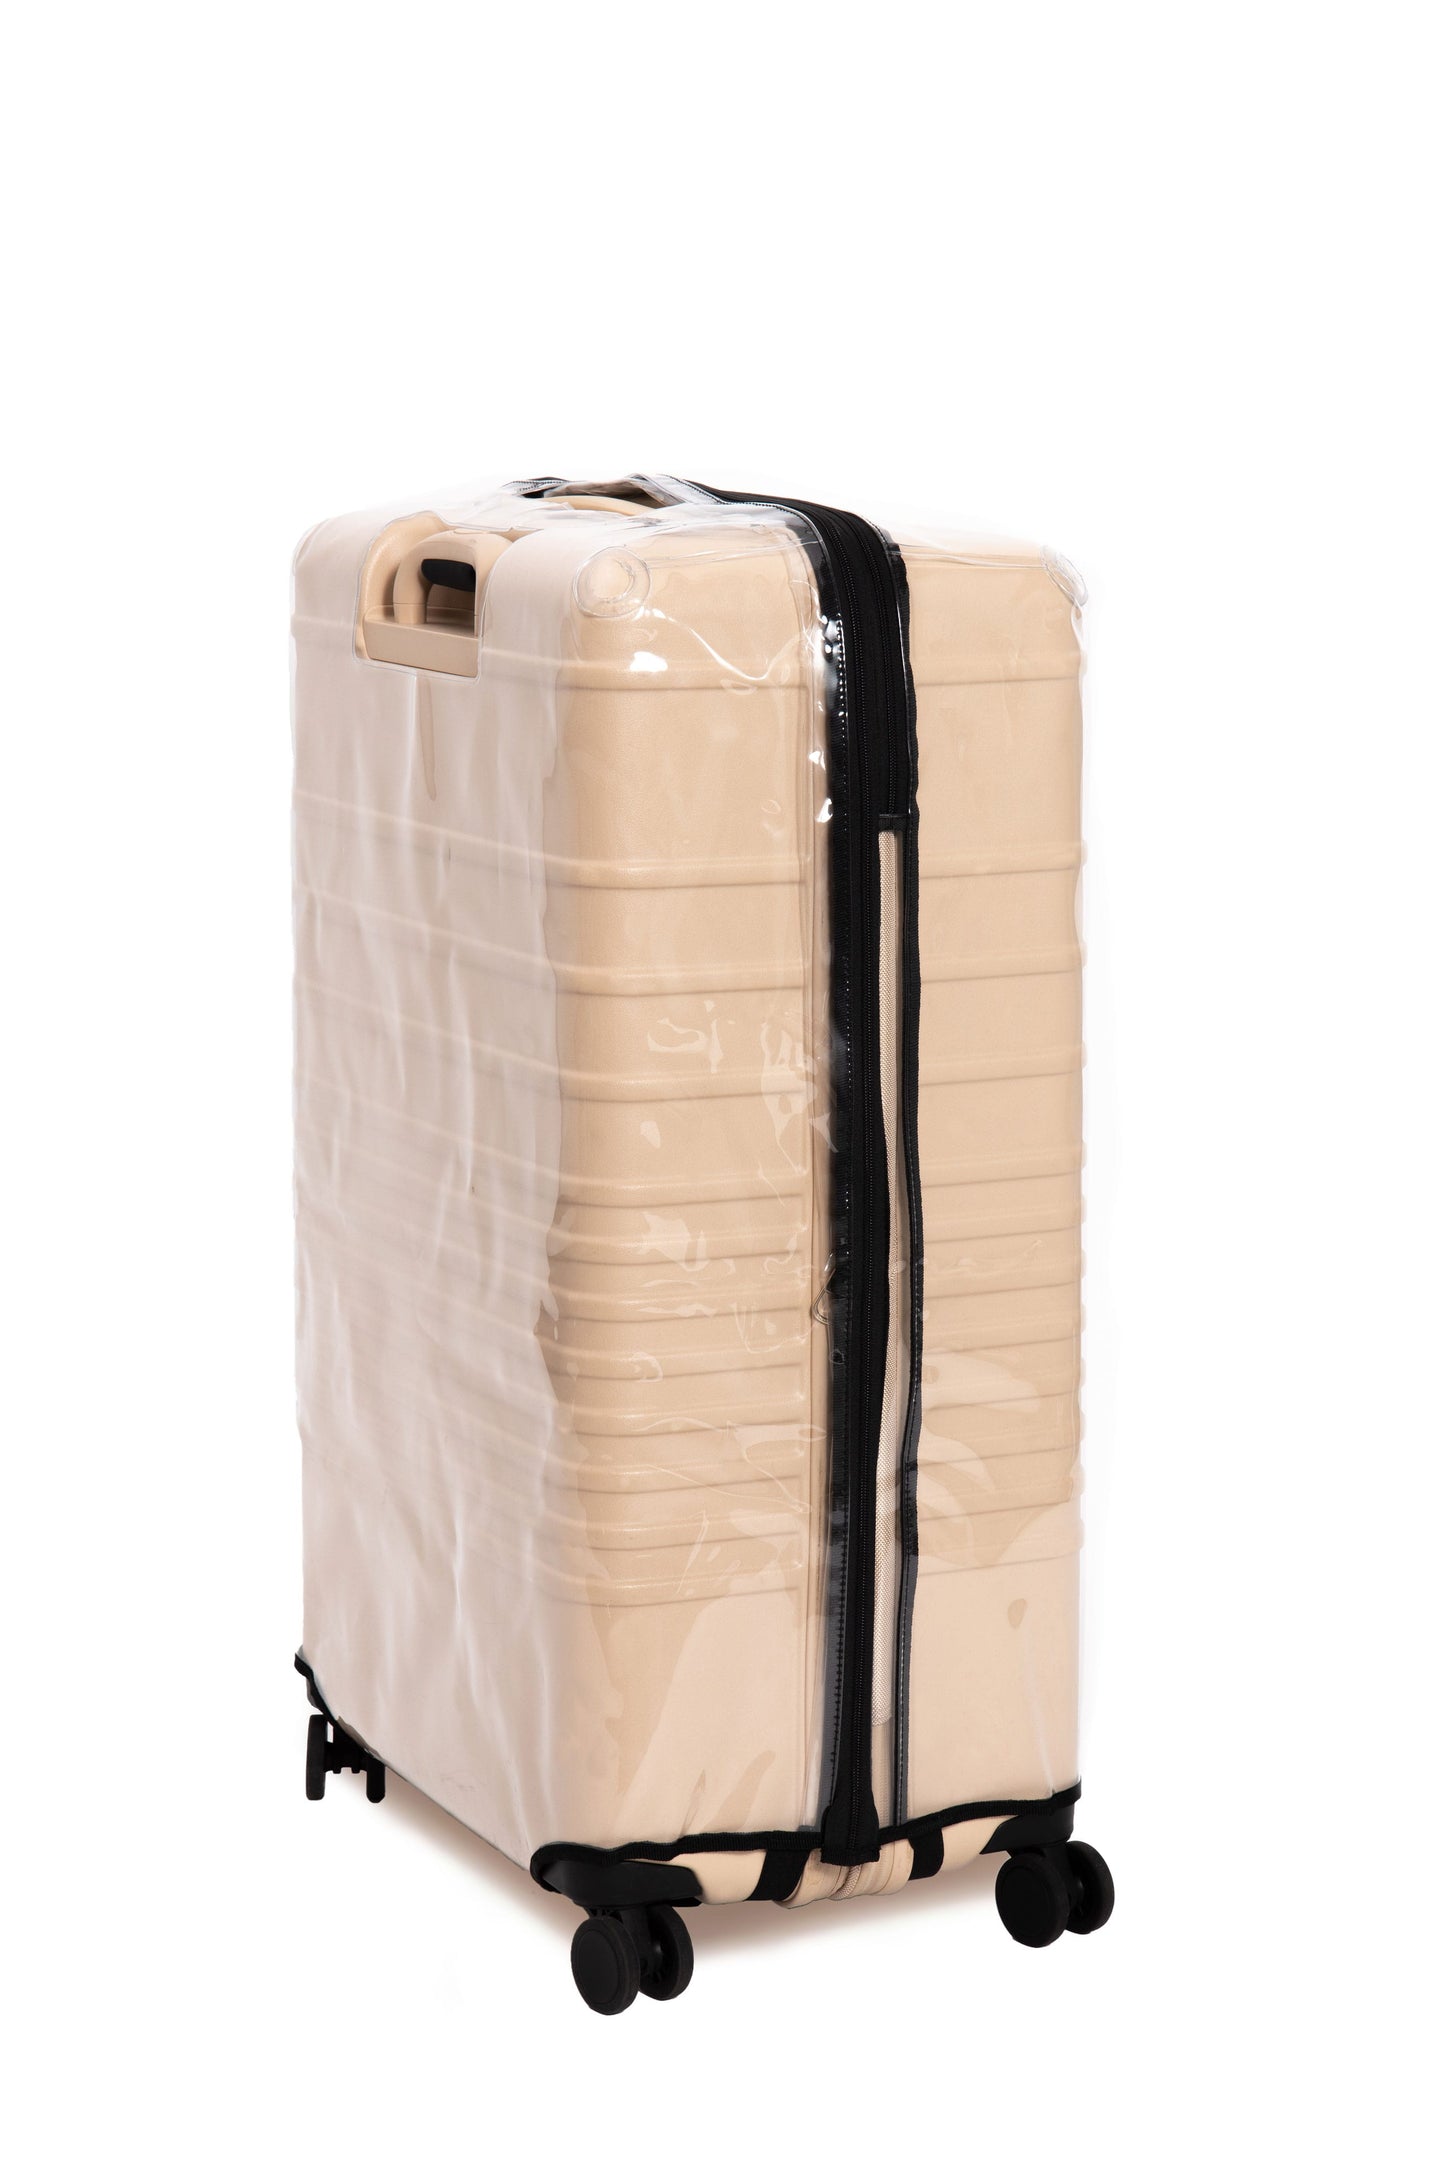 BÉIS 'The Large Check-In Luggage Cover' - Clear 29 Luggage Cover Protector